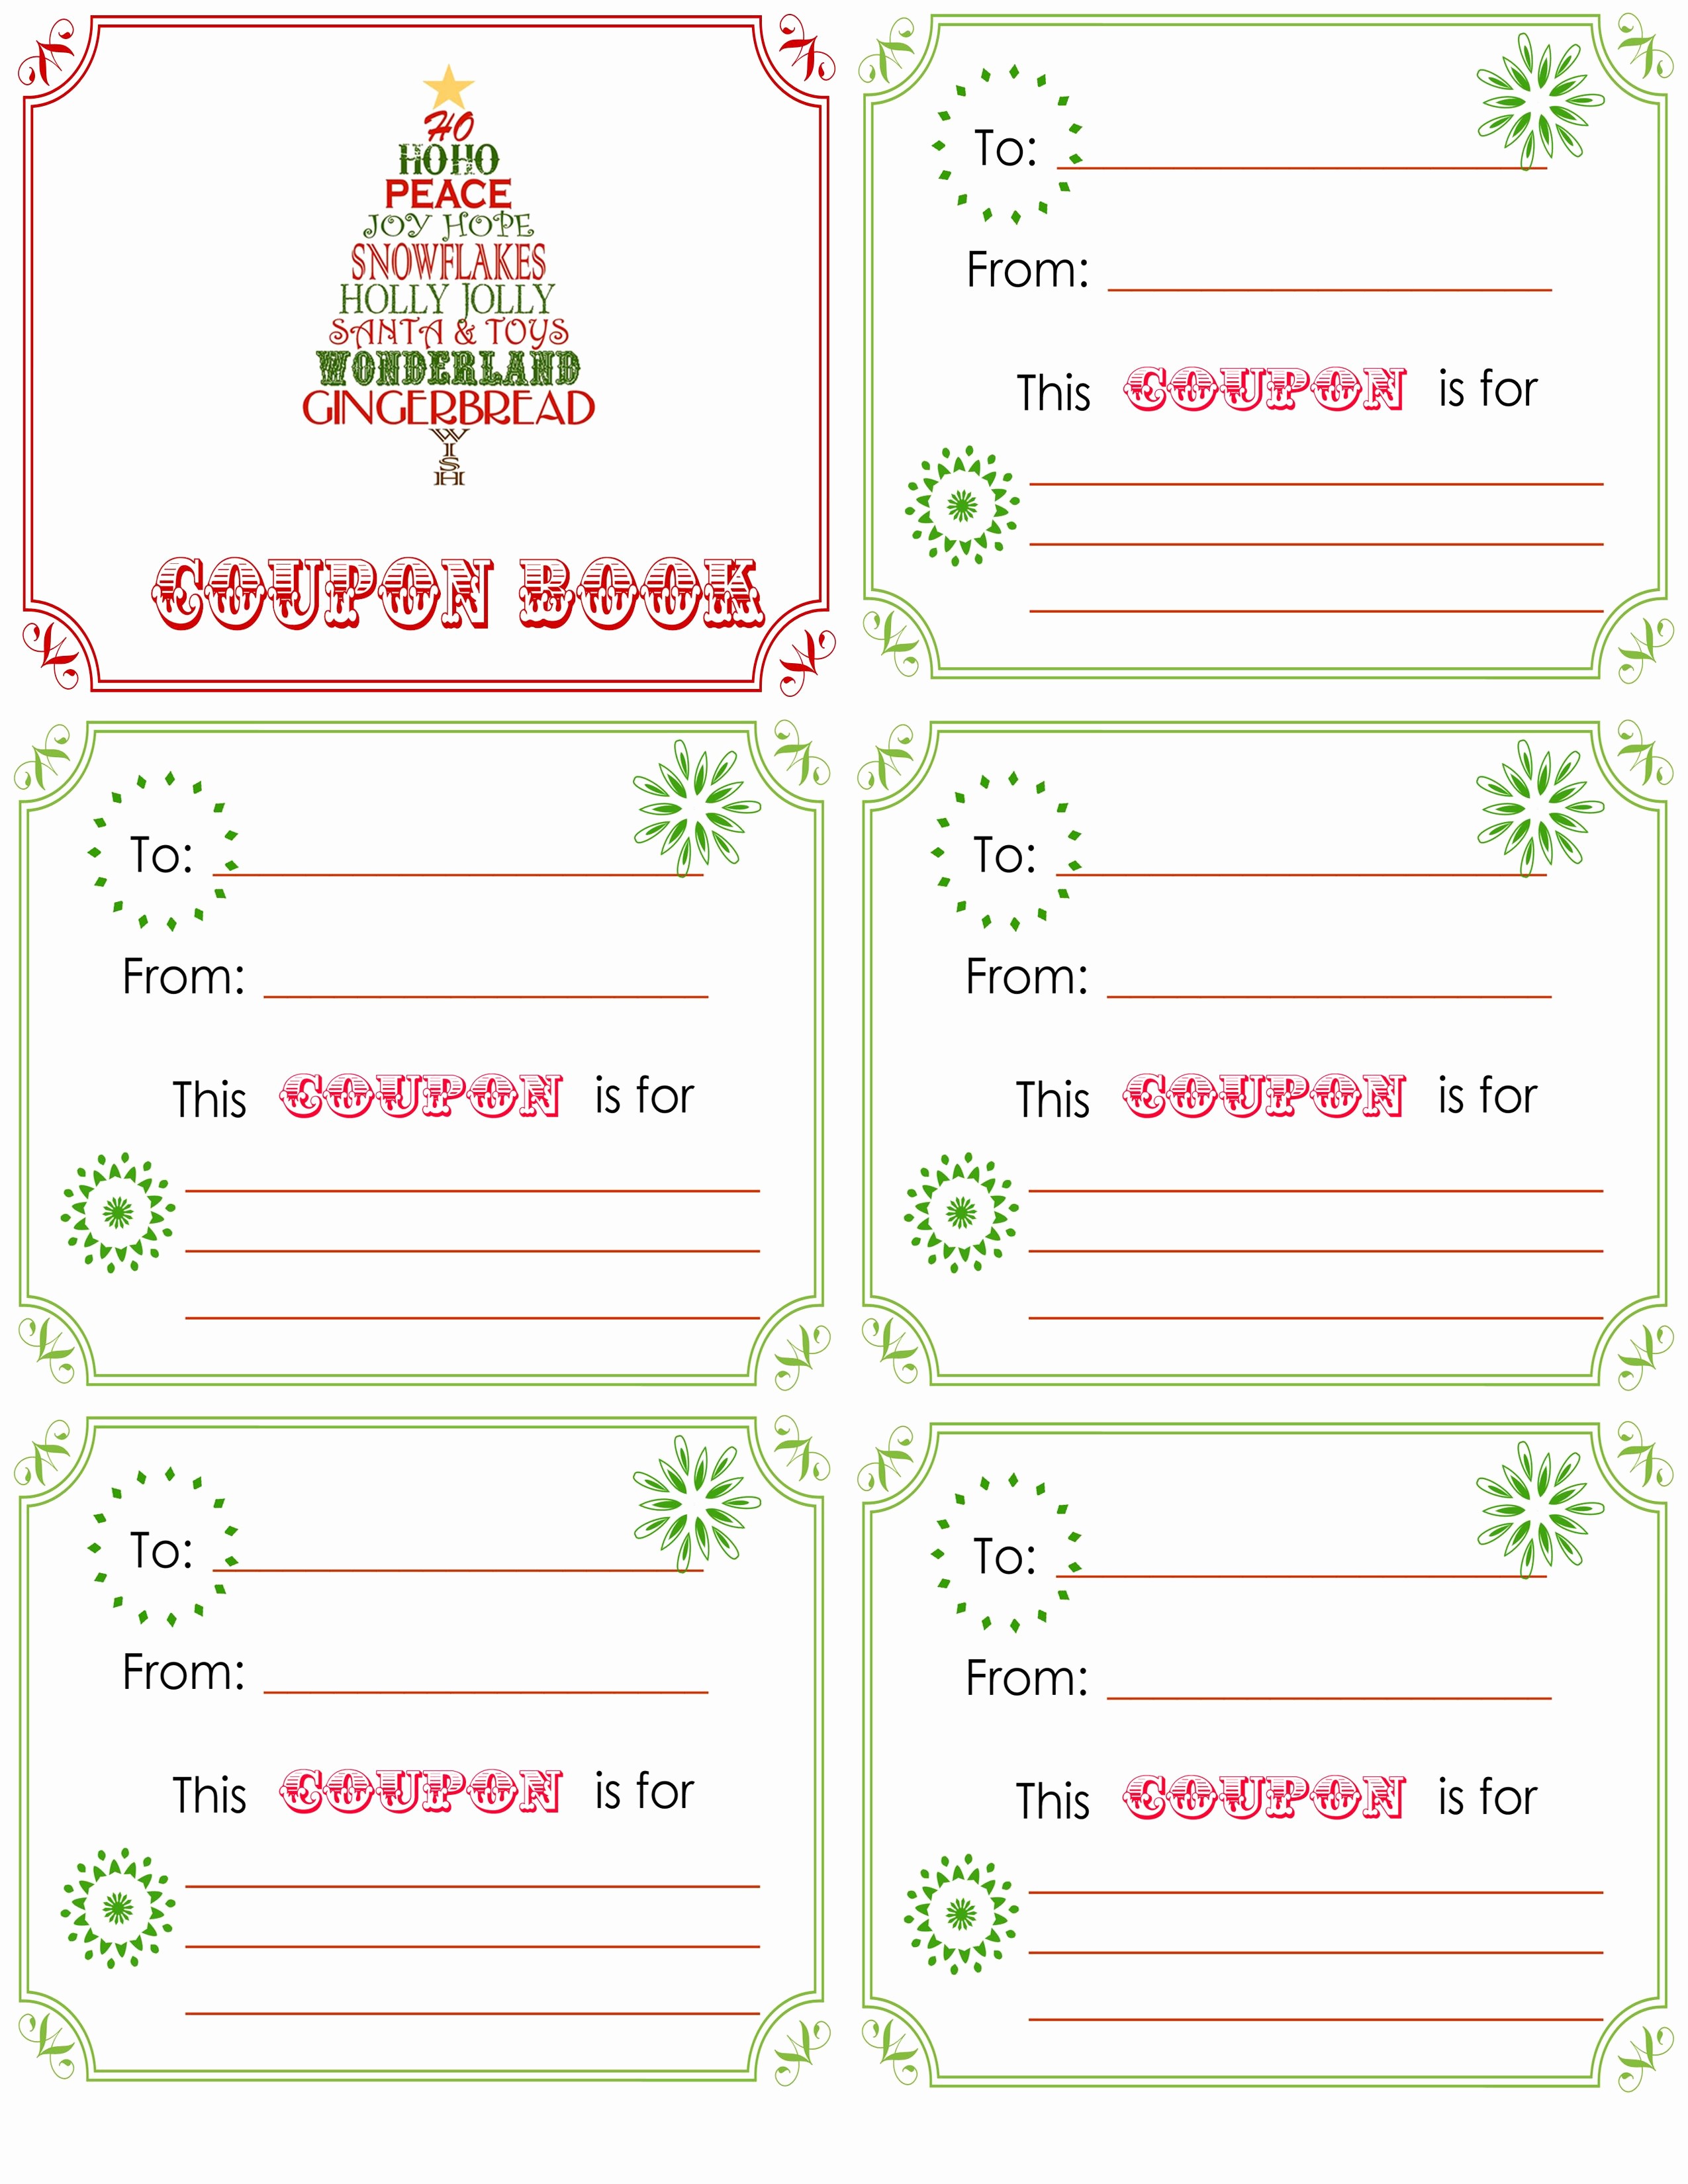 Printable Gift Coupon Templates Free Lovely Printable Christmas Coupon Book L is Ting 15 Minute